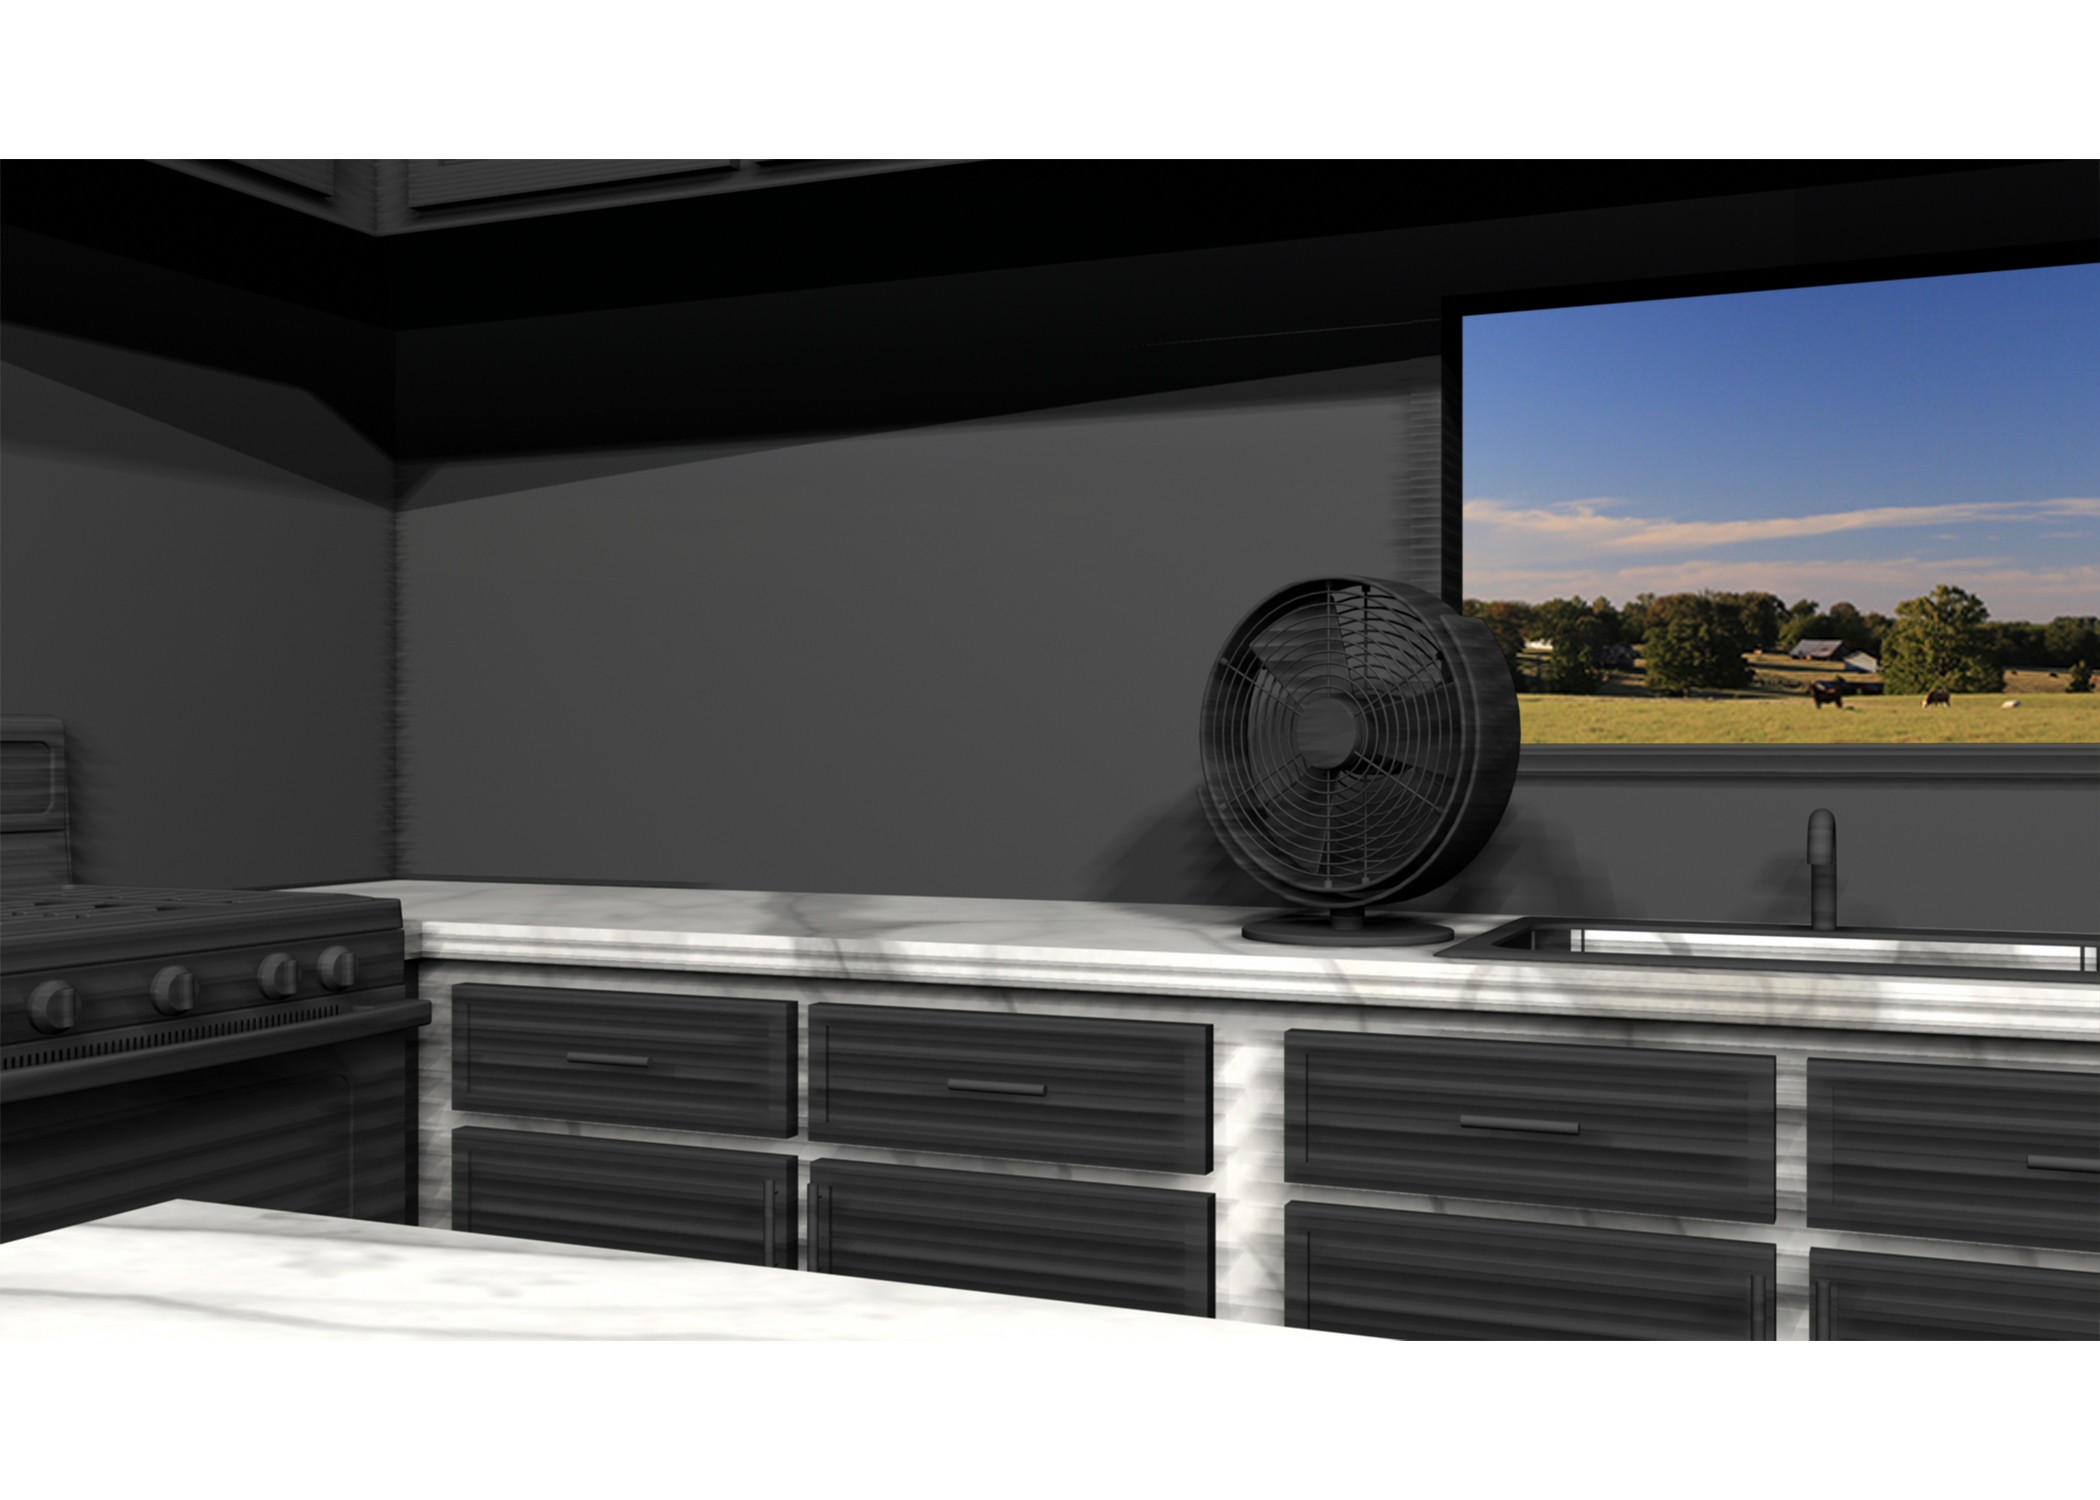 3D rendered image of a small fan on a kitchen counter near open window.